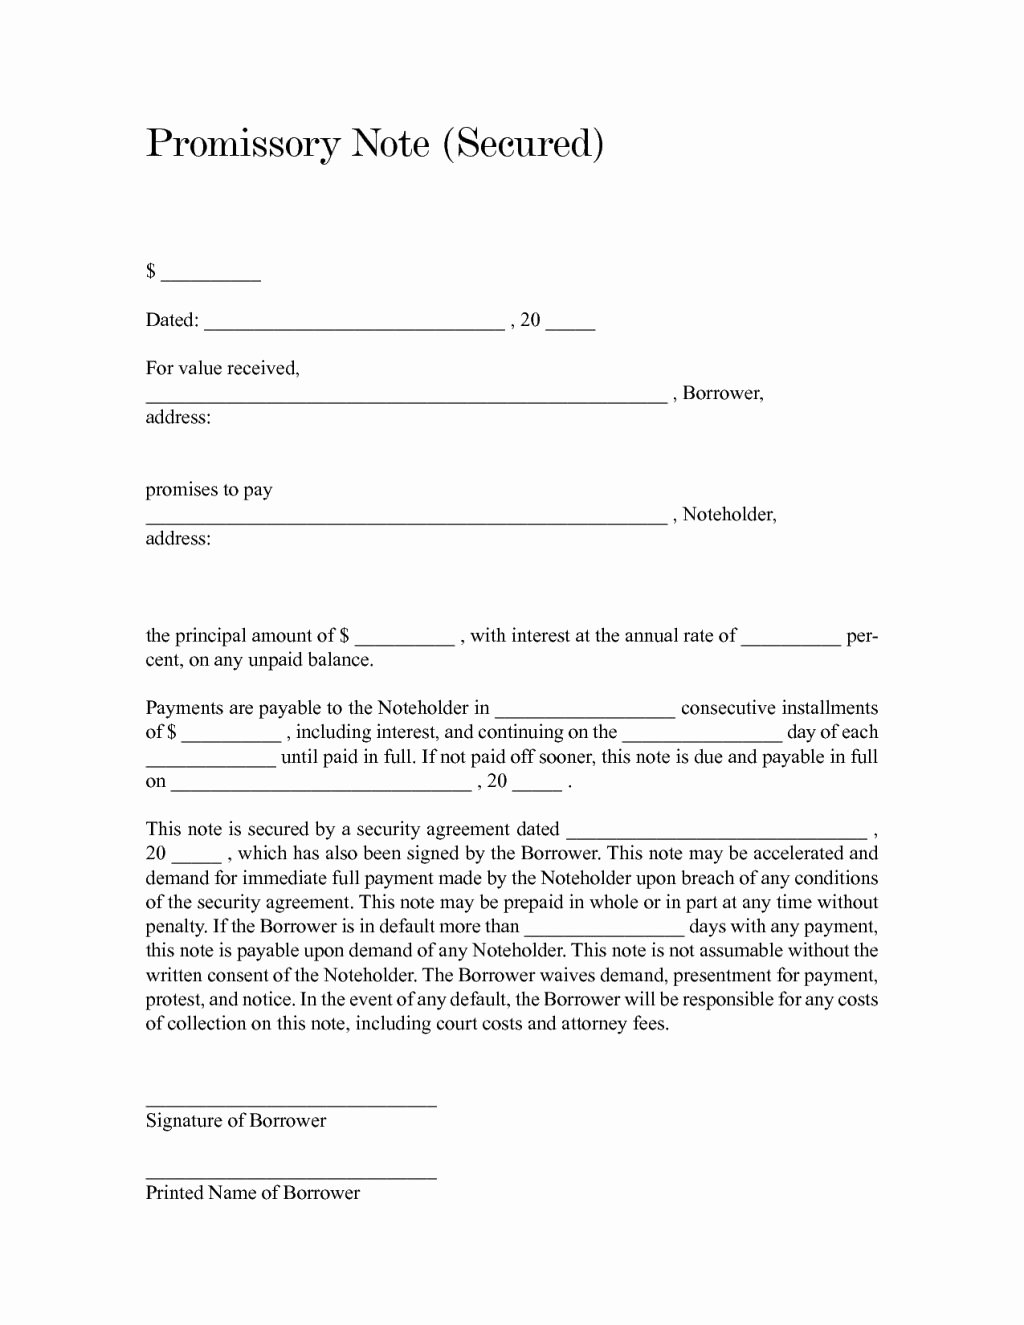 Promissory Notes Templates Free Elegant Blank and Fill Able Secured Promissory Note form Sample